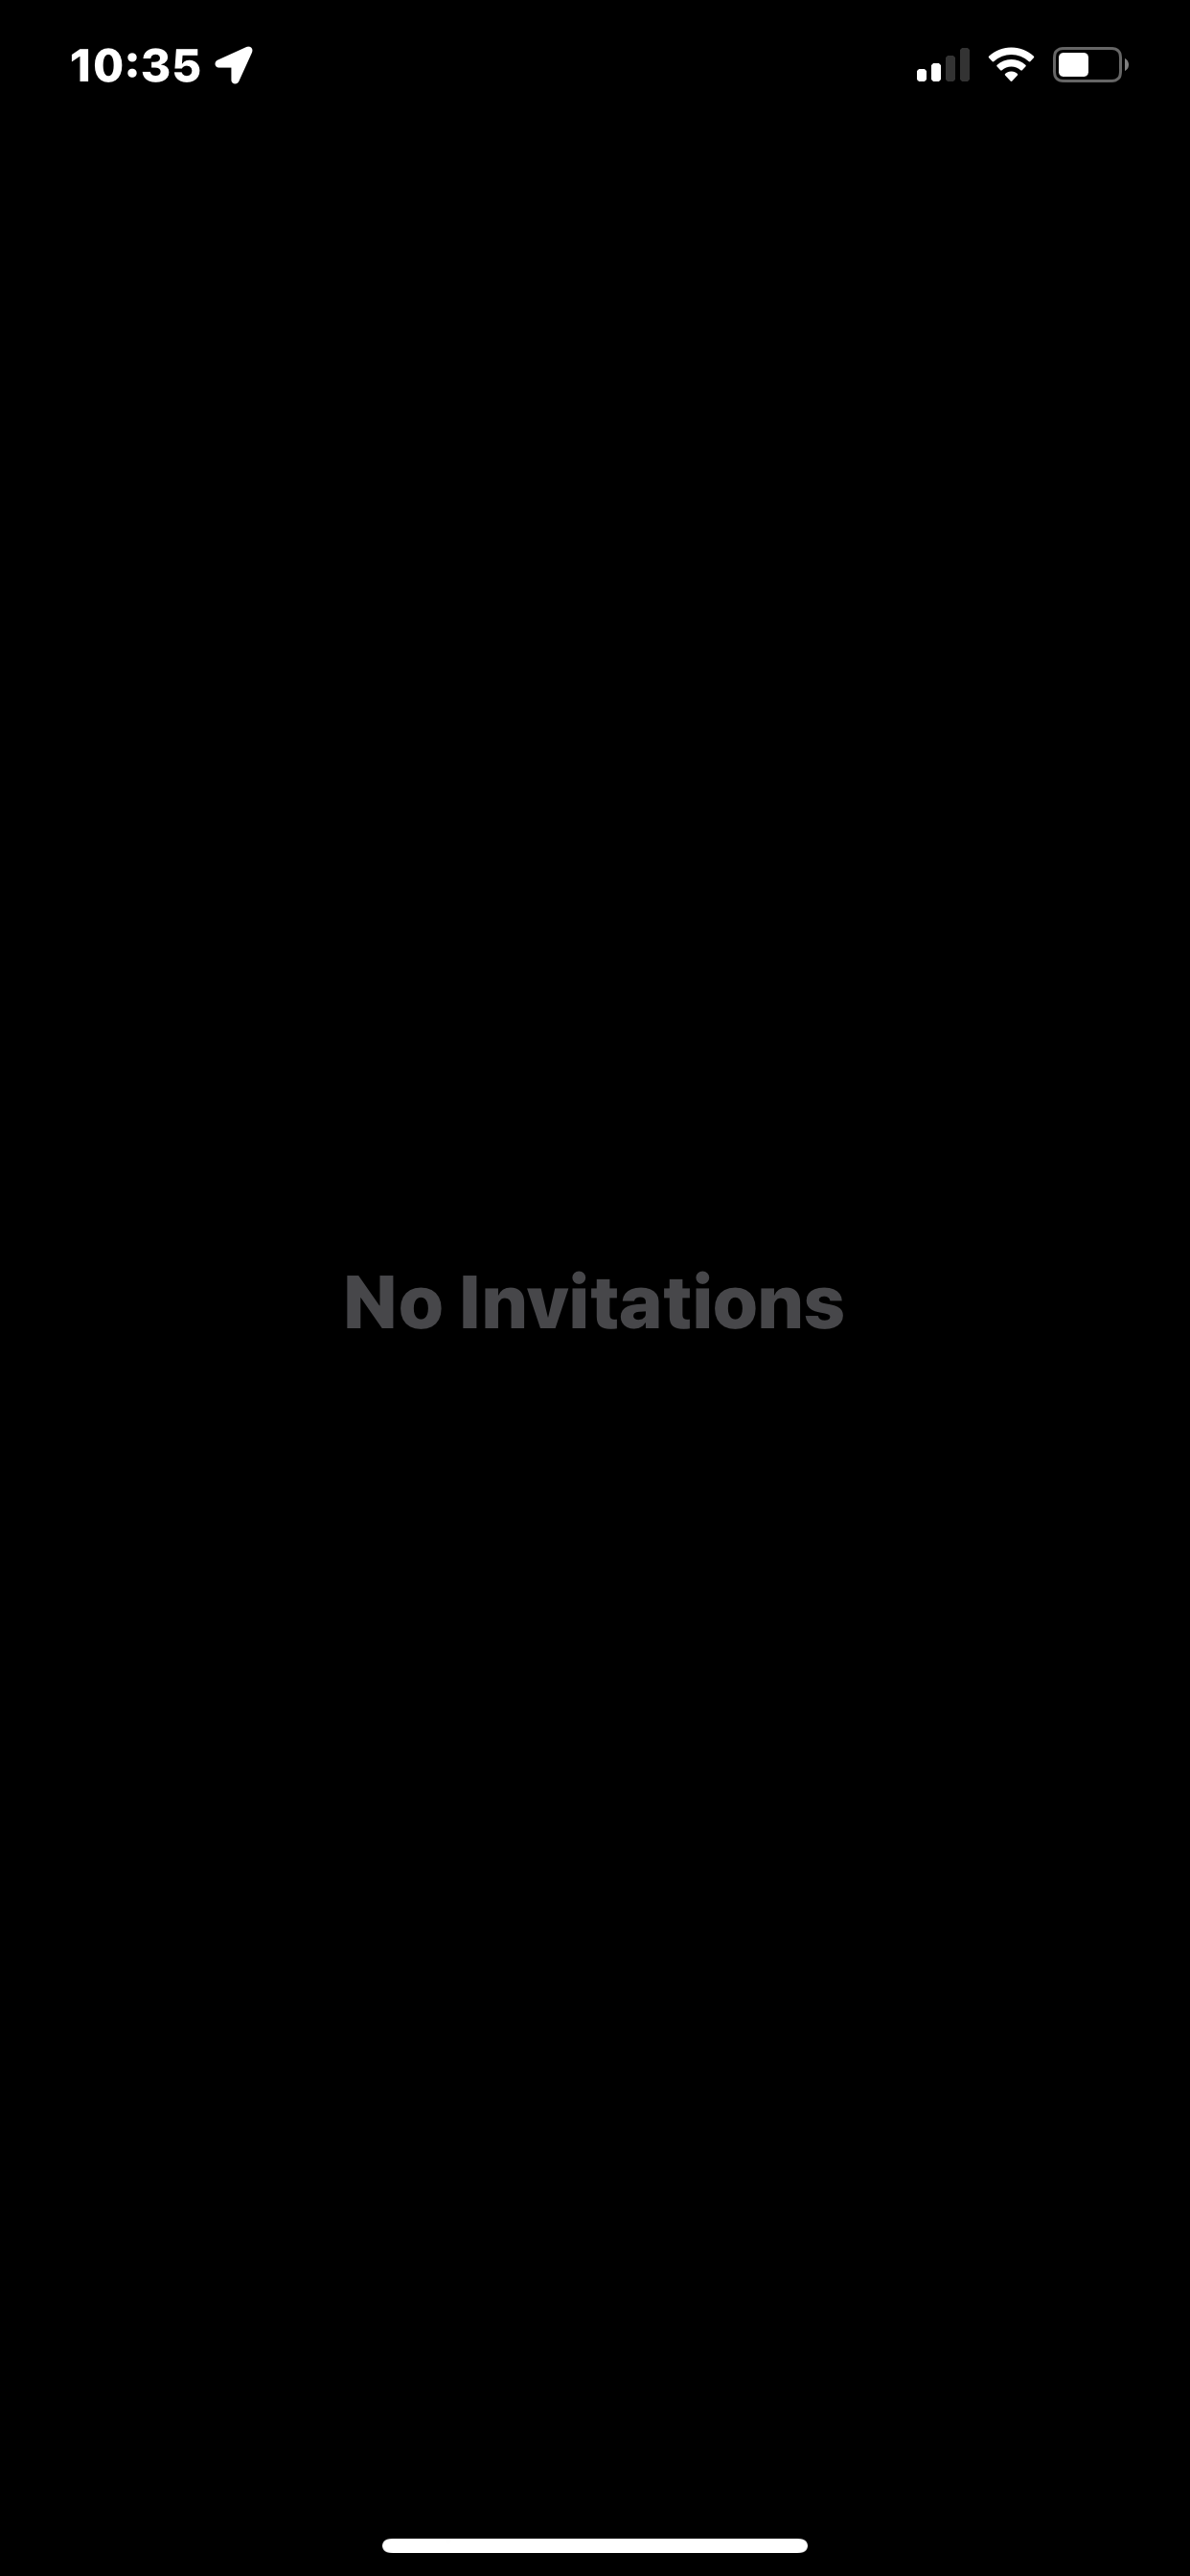 Calendar only shows No Invitations Apple Community